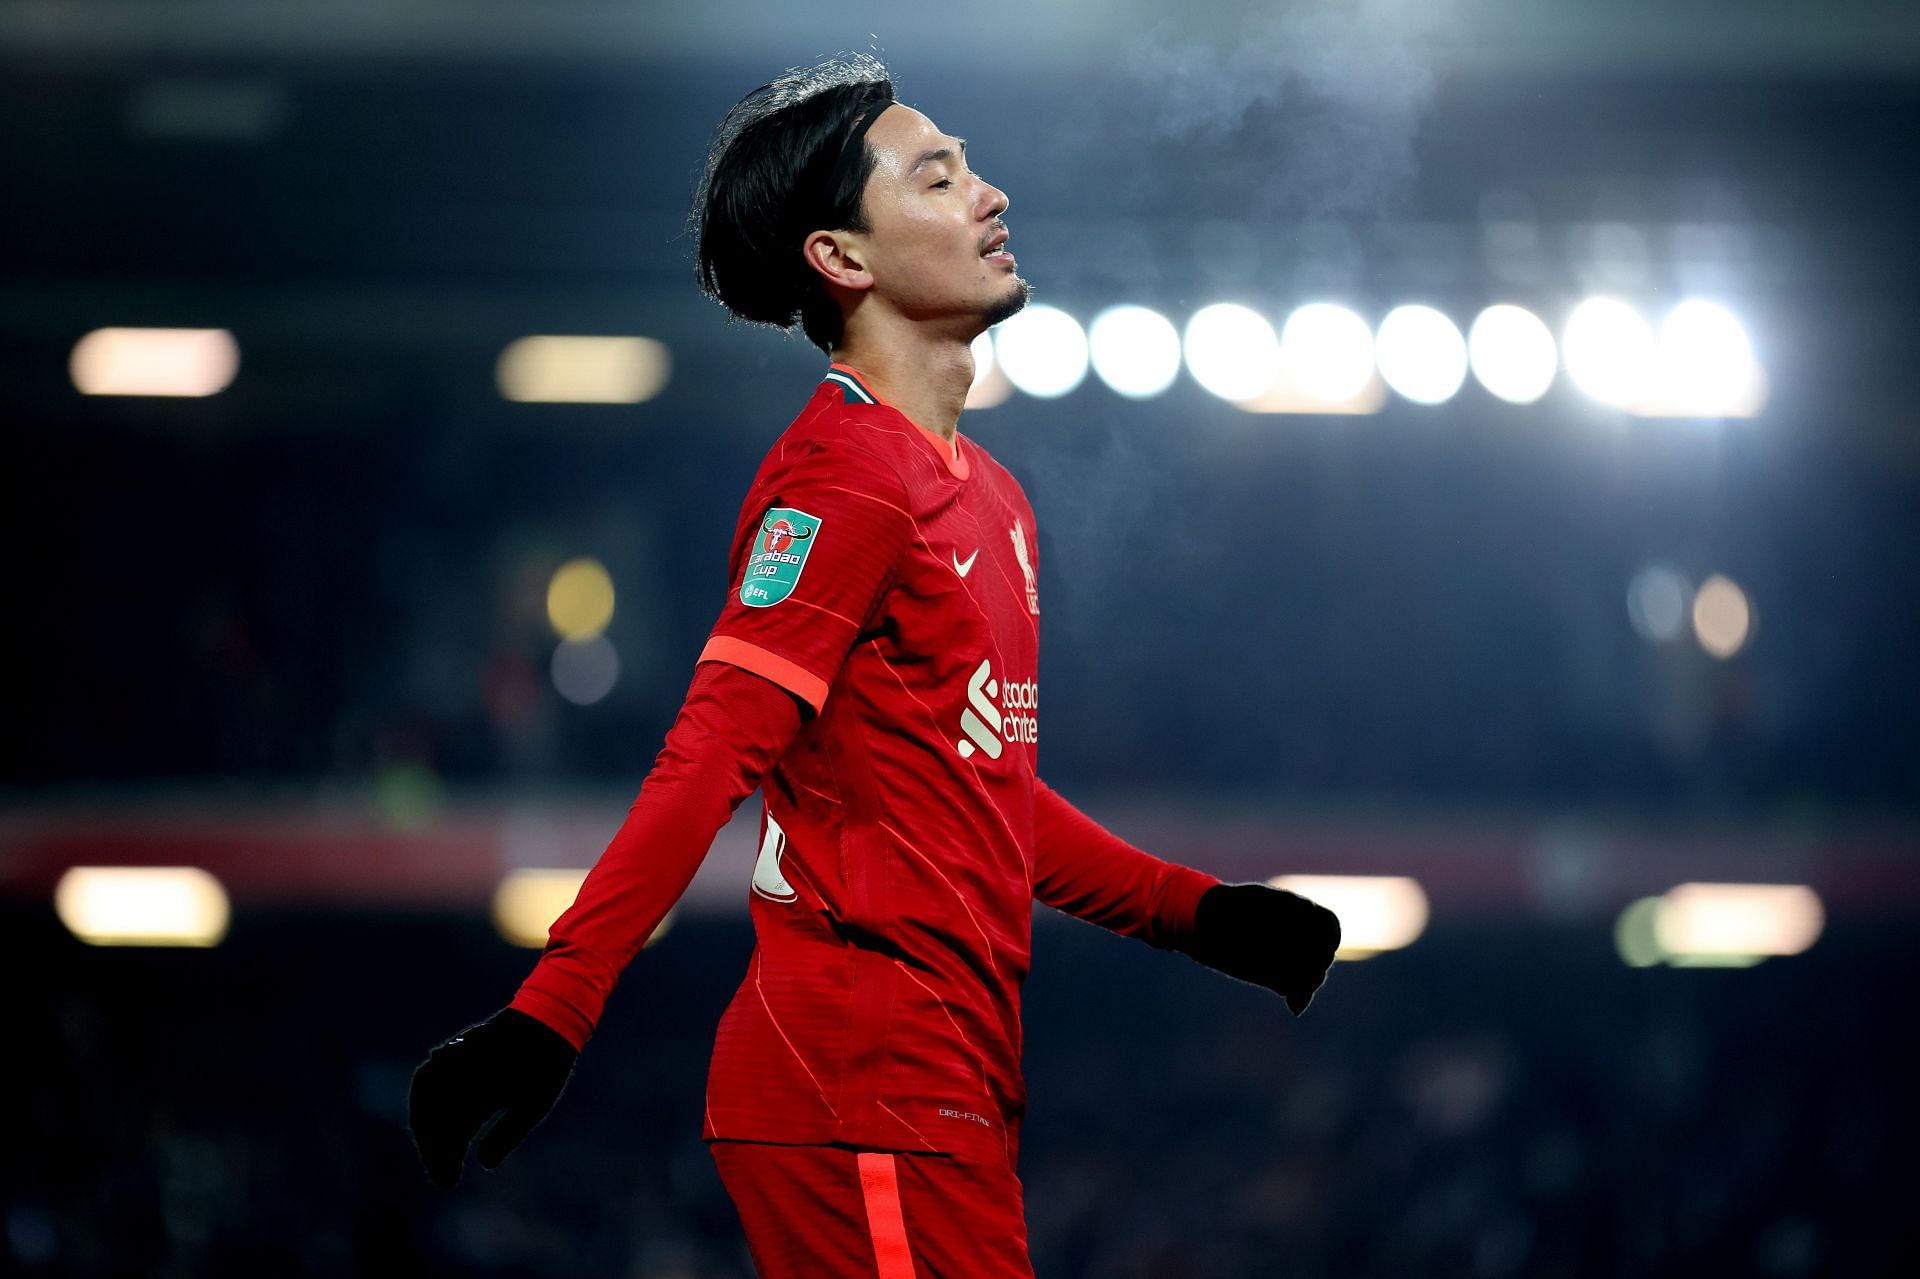 Takumi Minamino attracted loan offers in January but they have so far been refused, giving the Japan international another chance to boost his Liverpool career.